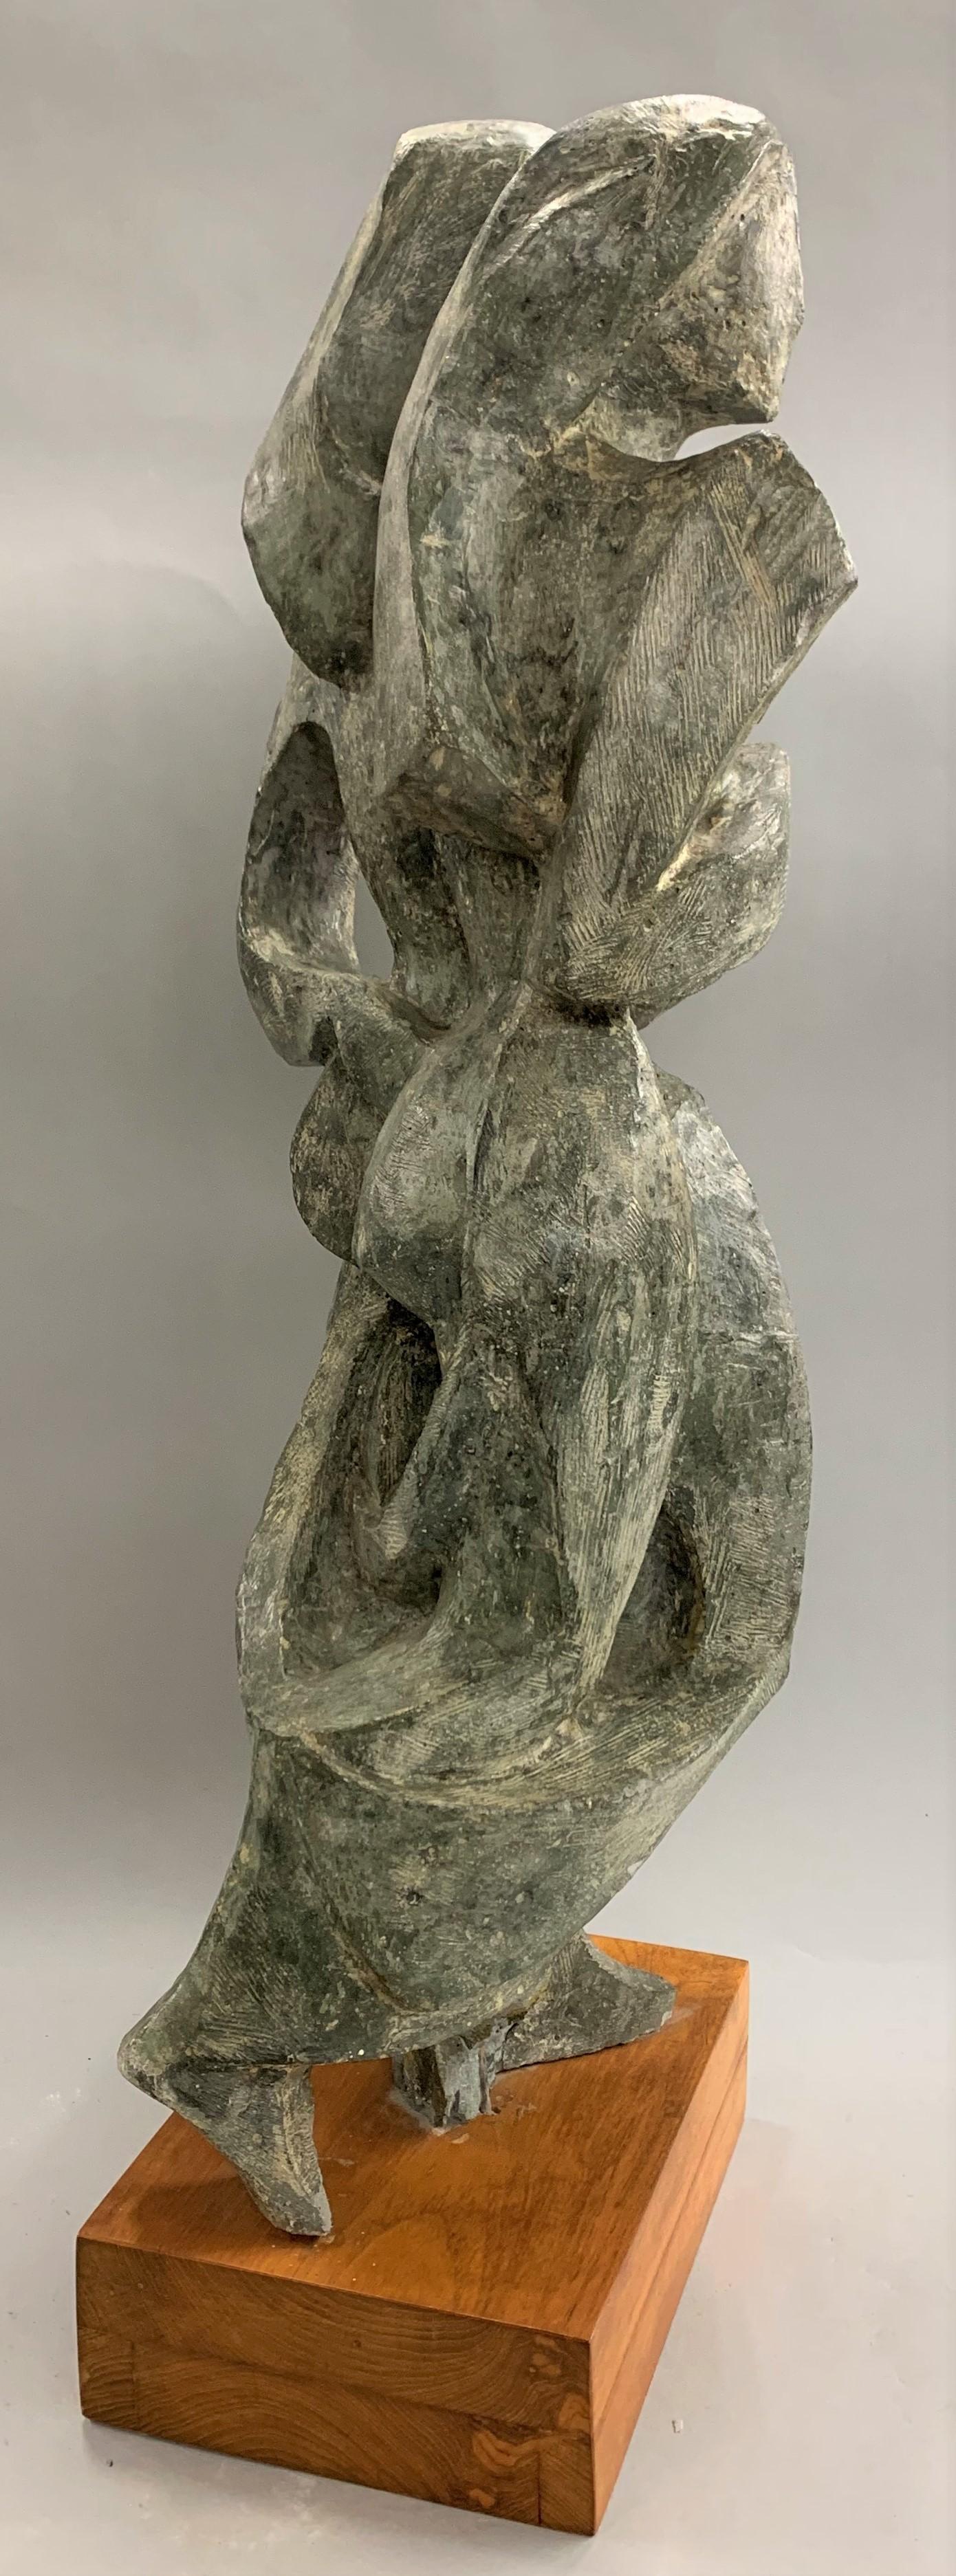 Two Women Walking - Abstract Impressionist Sculpture by Robert Hughes